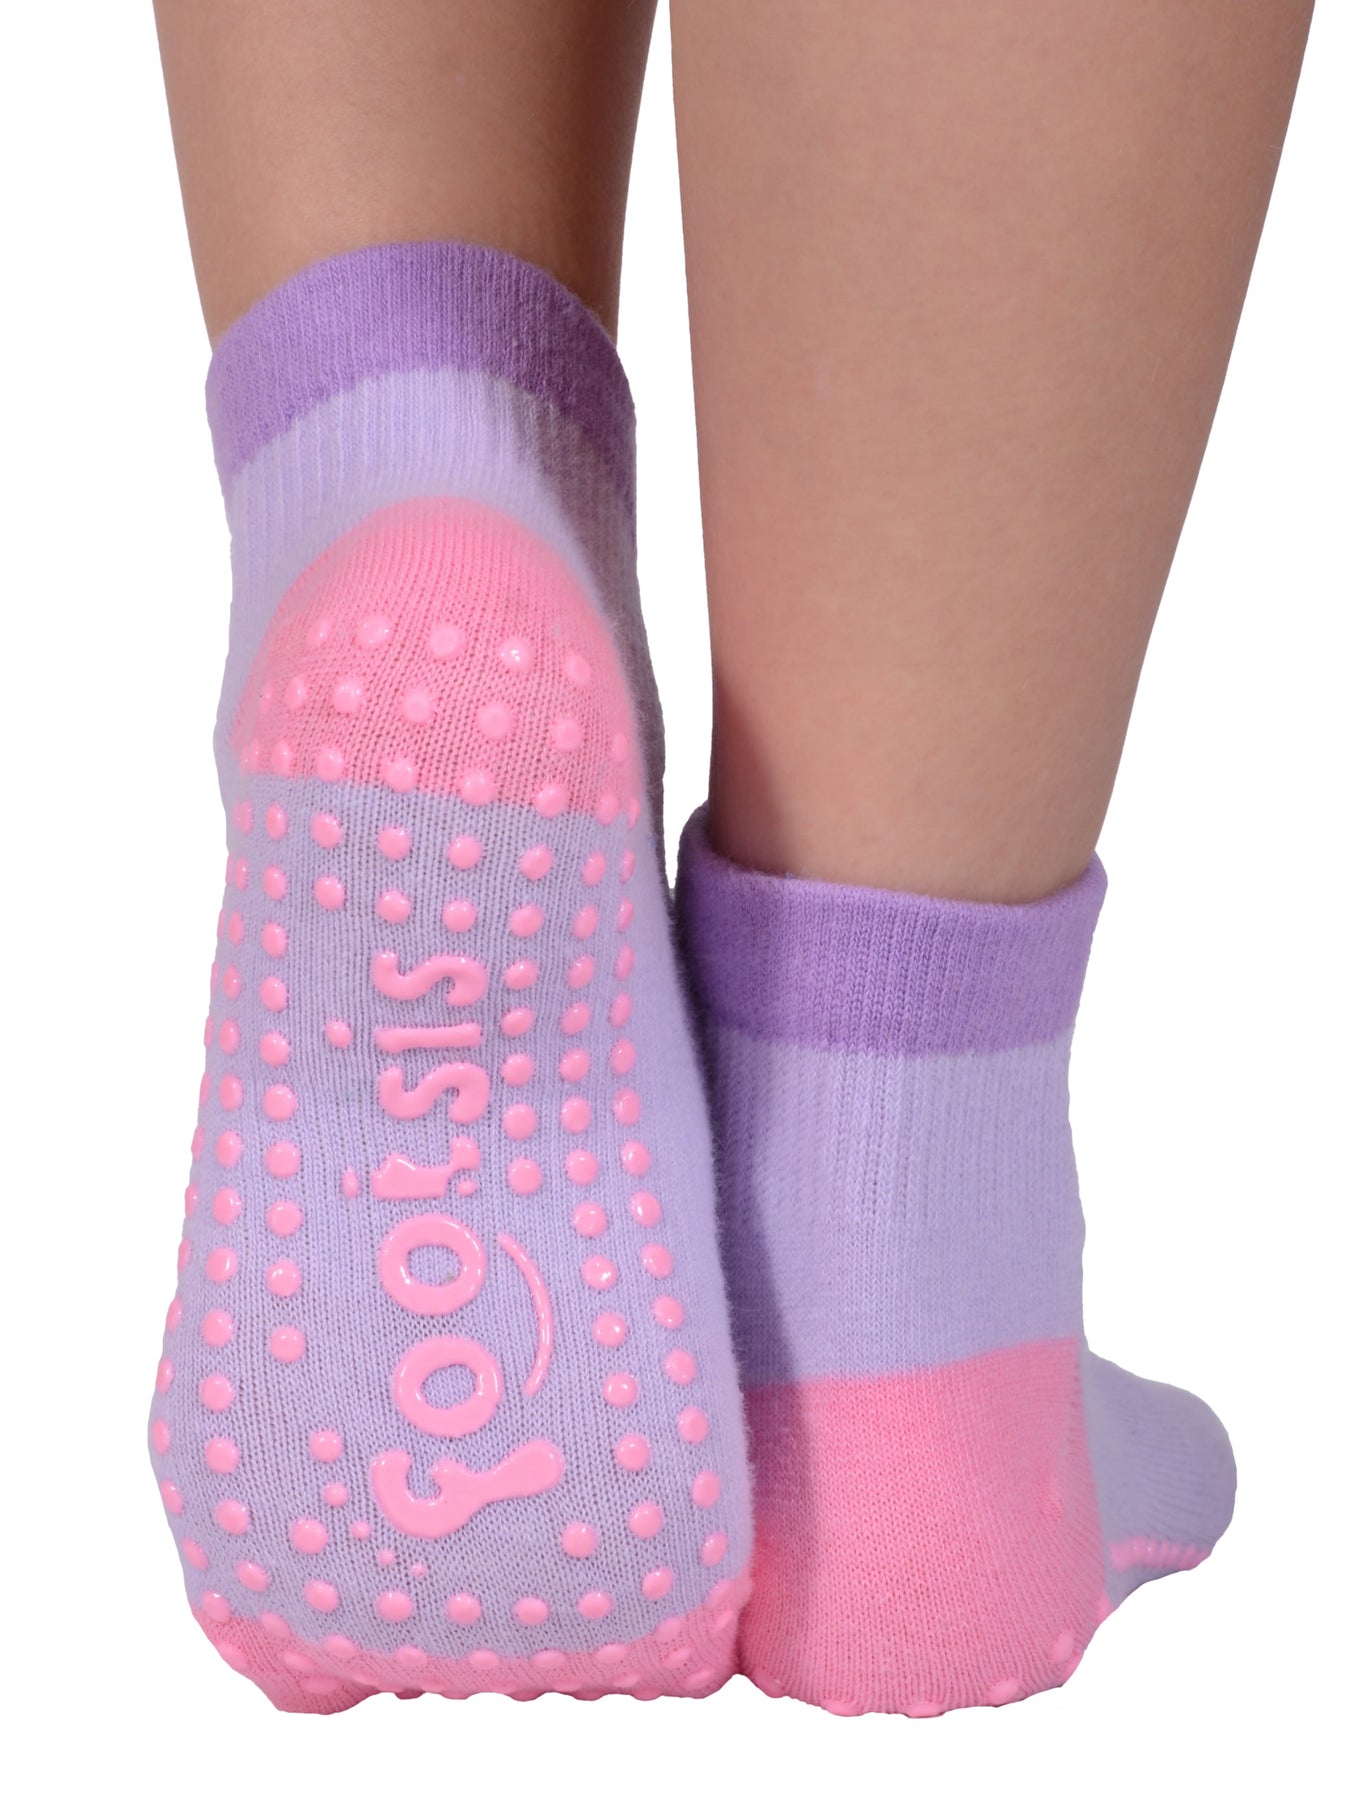 FOOTSIS Non Slip Grip Socks for Yoga, Pilates, Barre, Home, Hospital ,Mommy  and Me classes Bunny